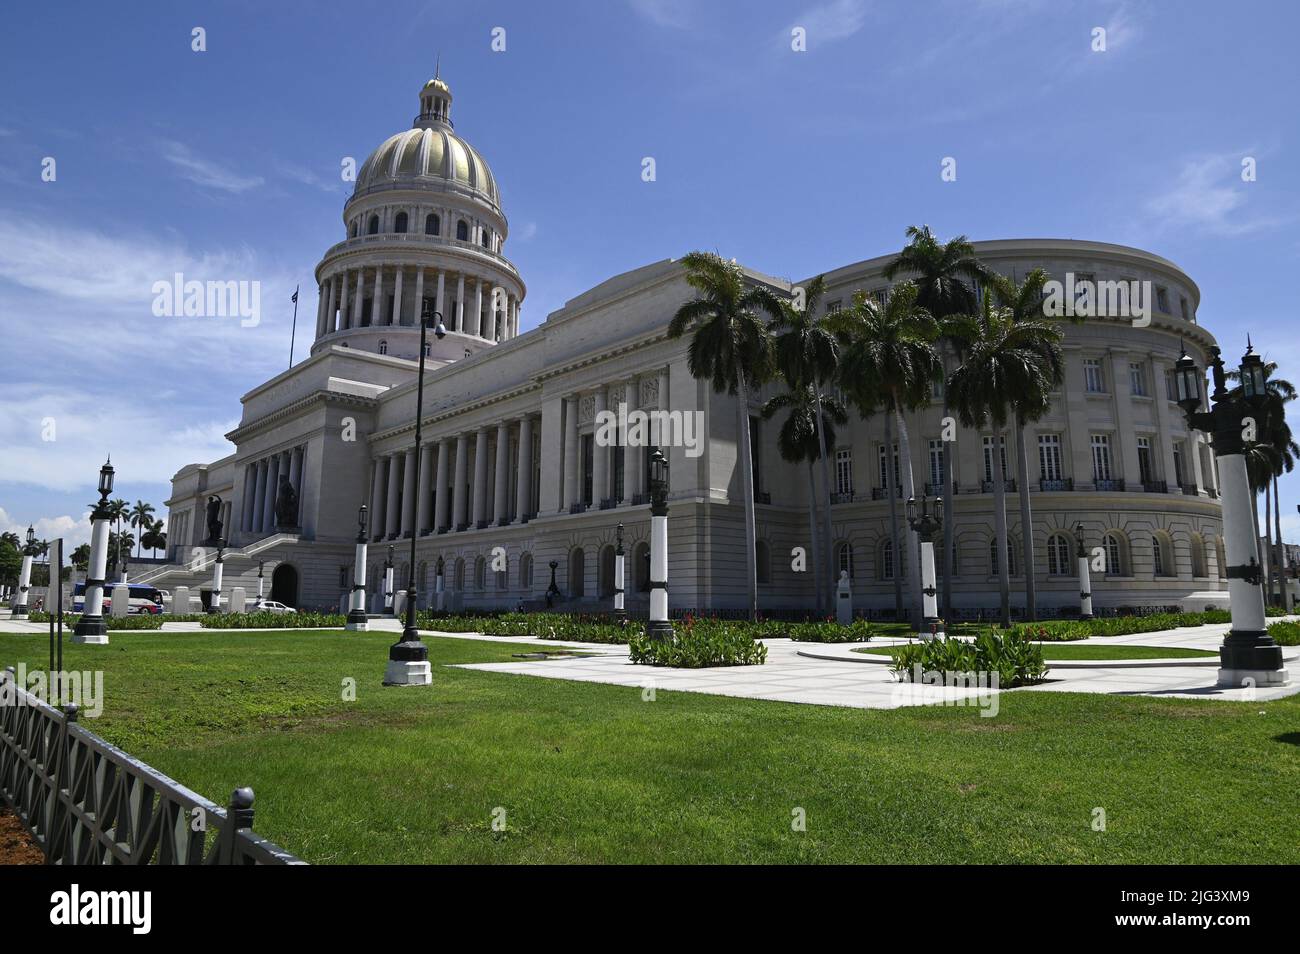 Landscape with panoramic gardens view of El Capitolio, the emblematic National Capitol building in the historic center of Havana, Cuba. Stock Photo